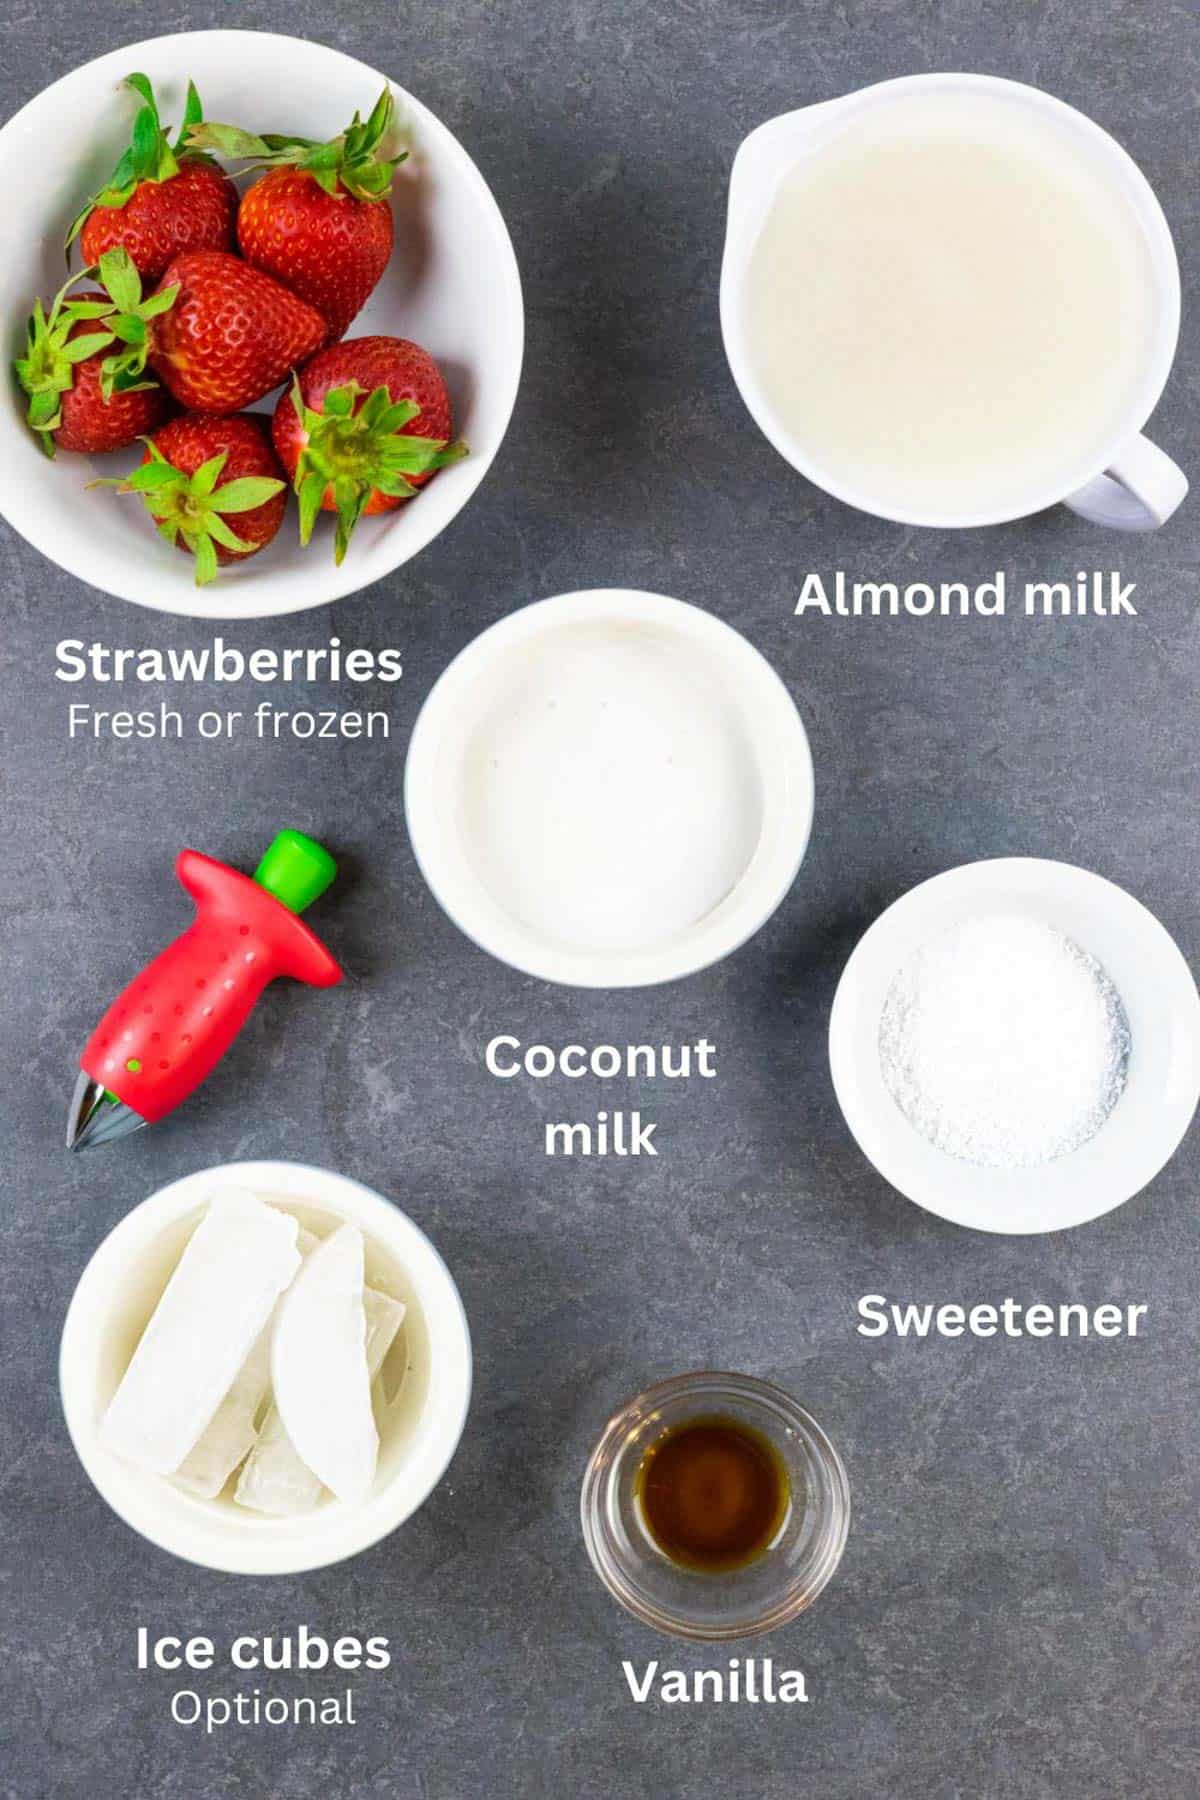 Ingredients for strawberry smoothie in small bowls on a grey board with white text labels.